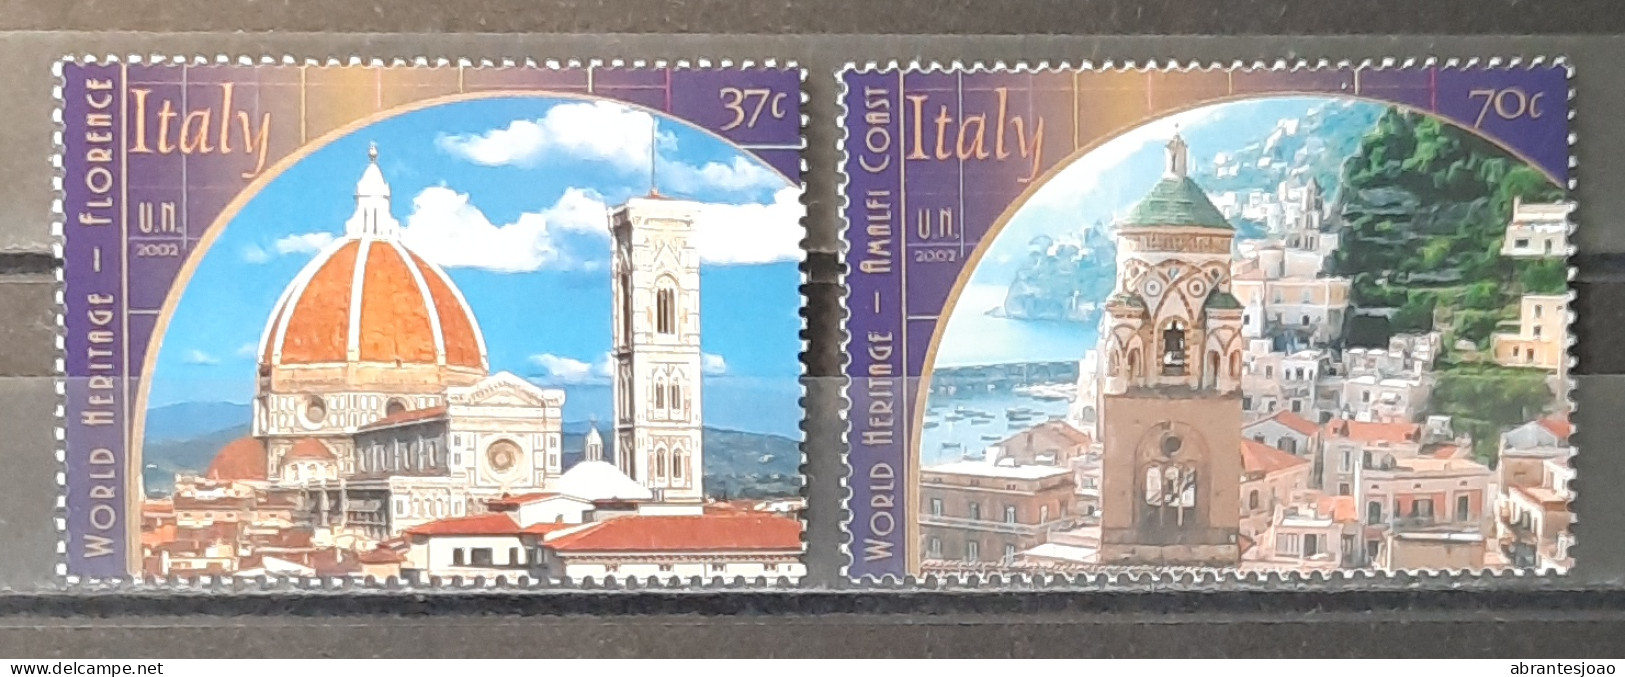 2002 - United Nations New York - MNH - Italy World Heritage - 2 Stamps - Ungebraucht